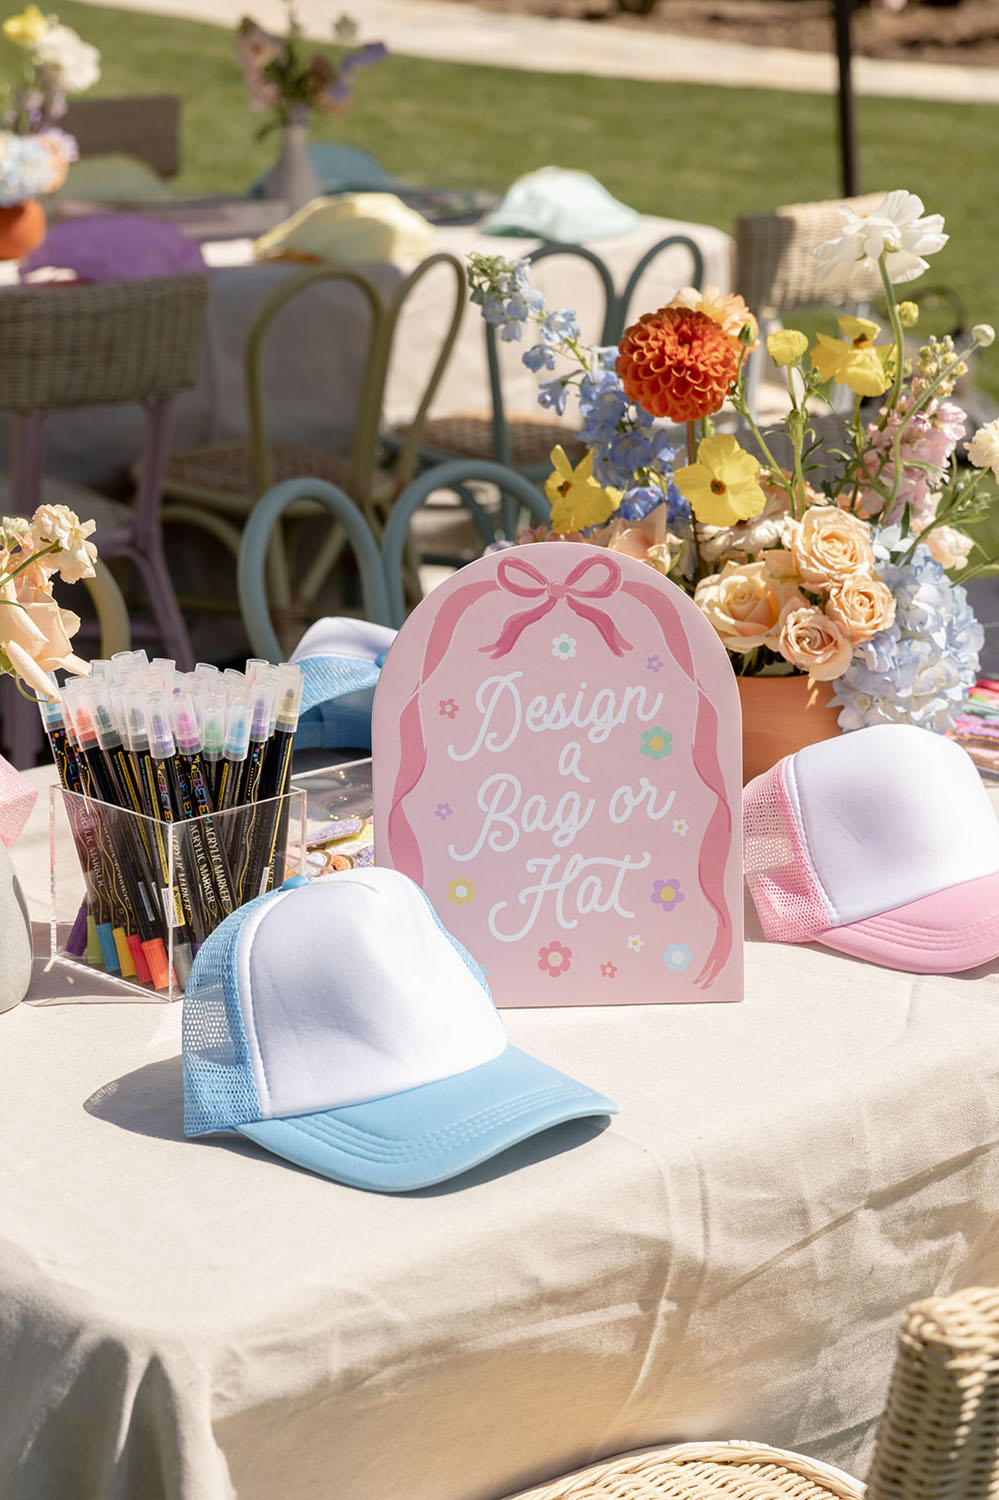 hat and bag craft table - girl birthday party ideas